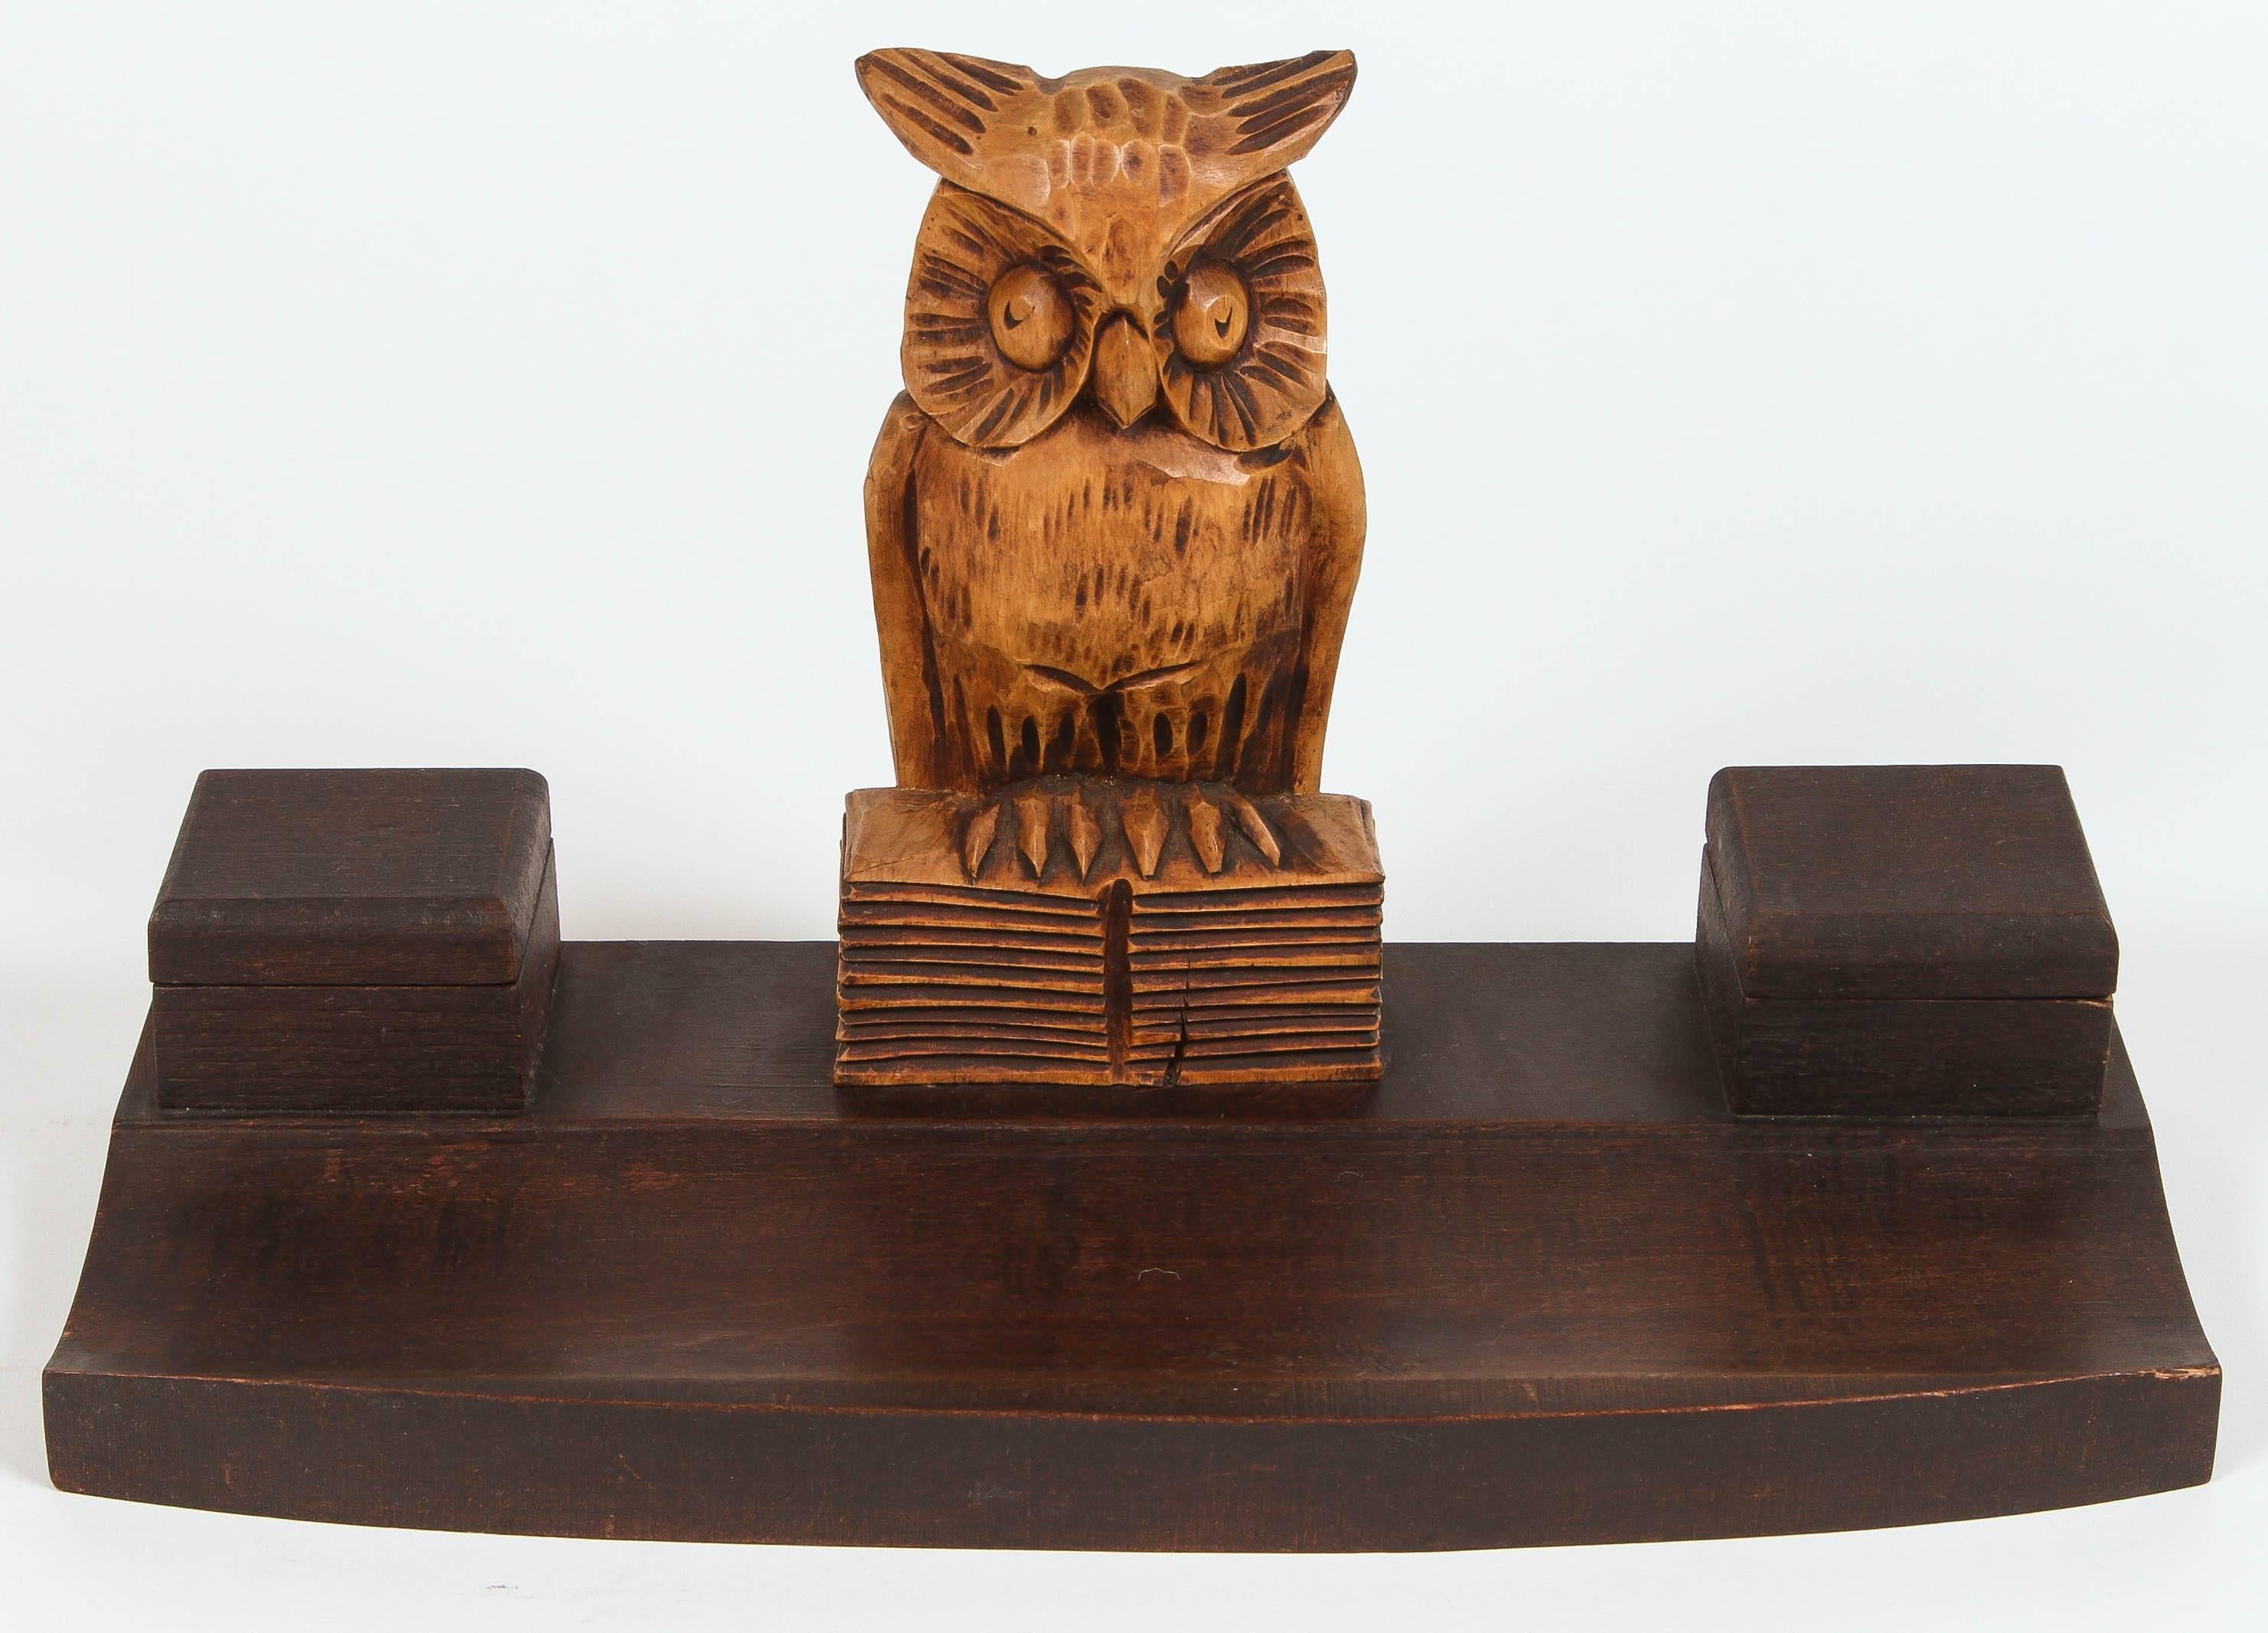 Vintage two-piece carved wooden owl desk set. Main piece features a large owl at the center sitting on a tray, which also has two covered compartments for quill ink, one of which still has the original porcelain insert. Second piece has a smaller